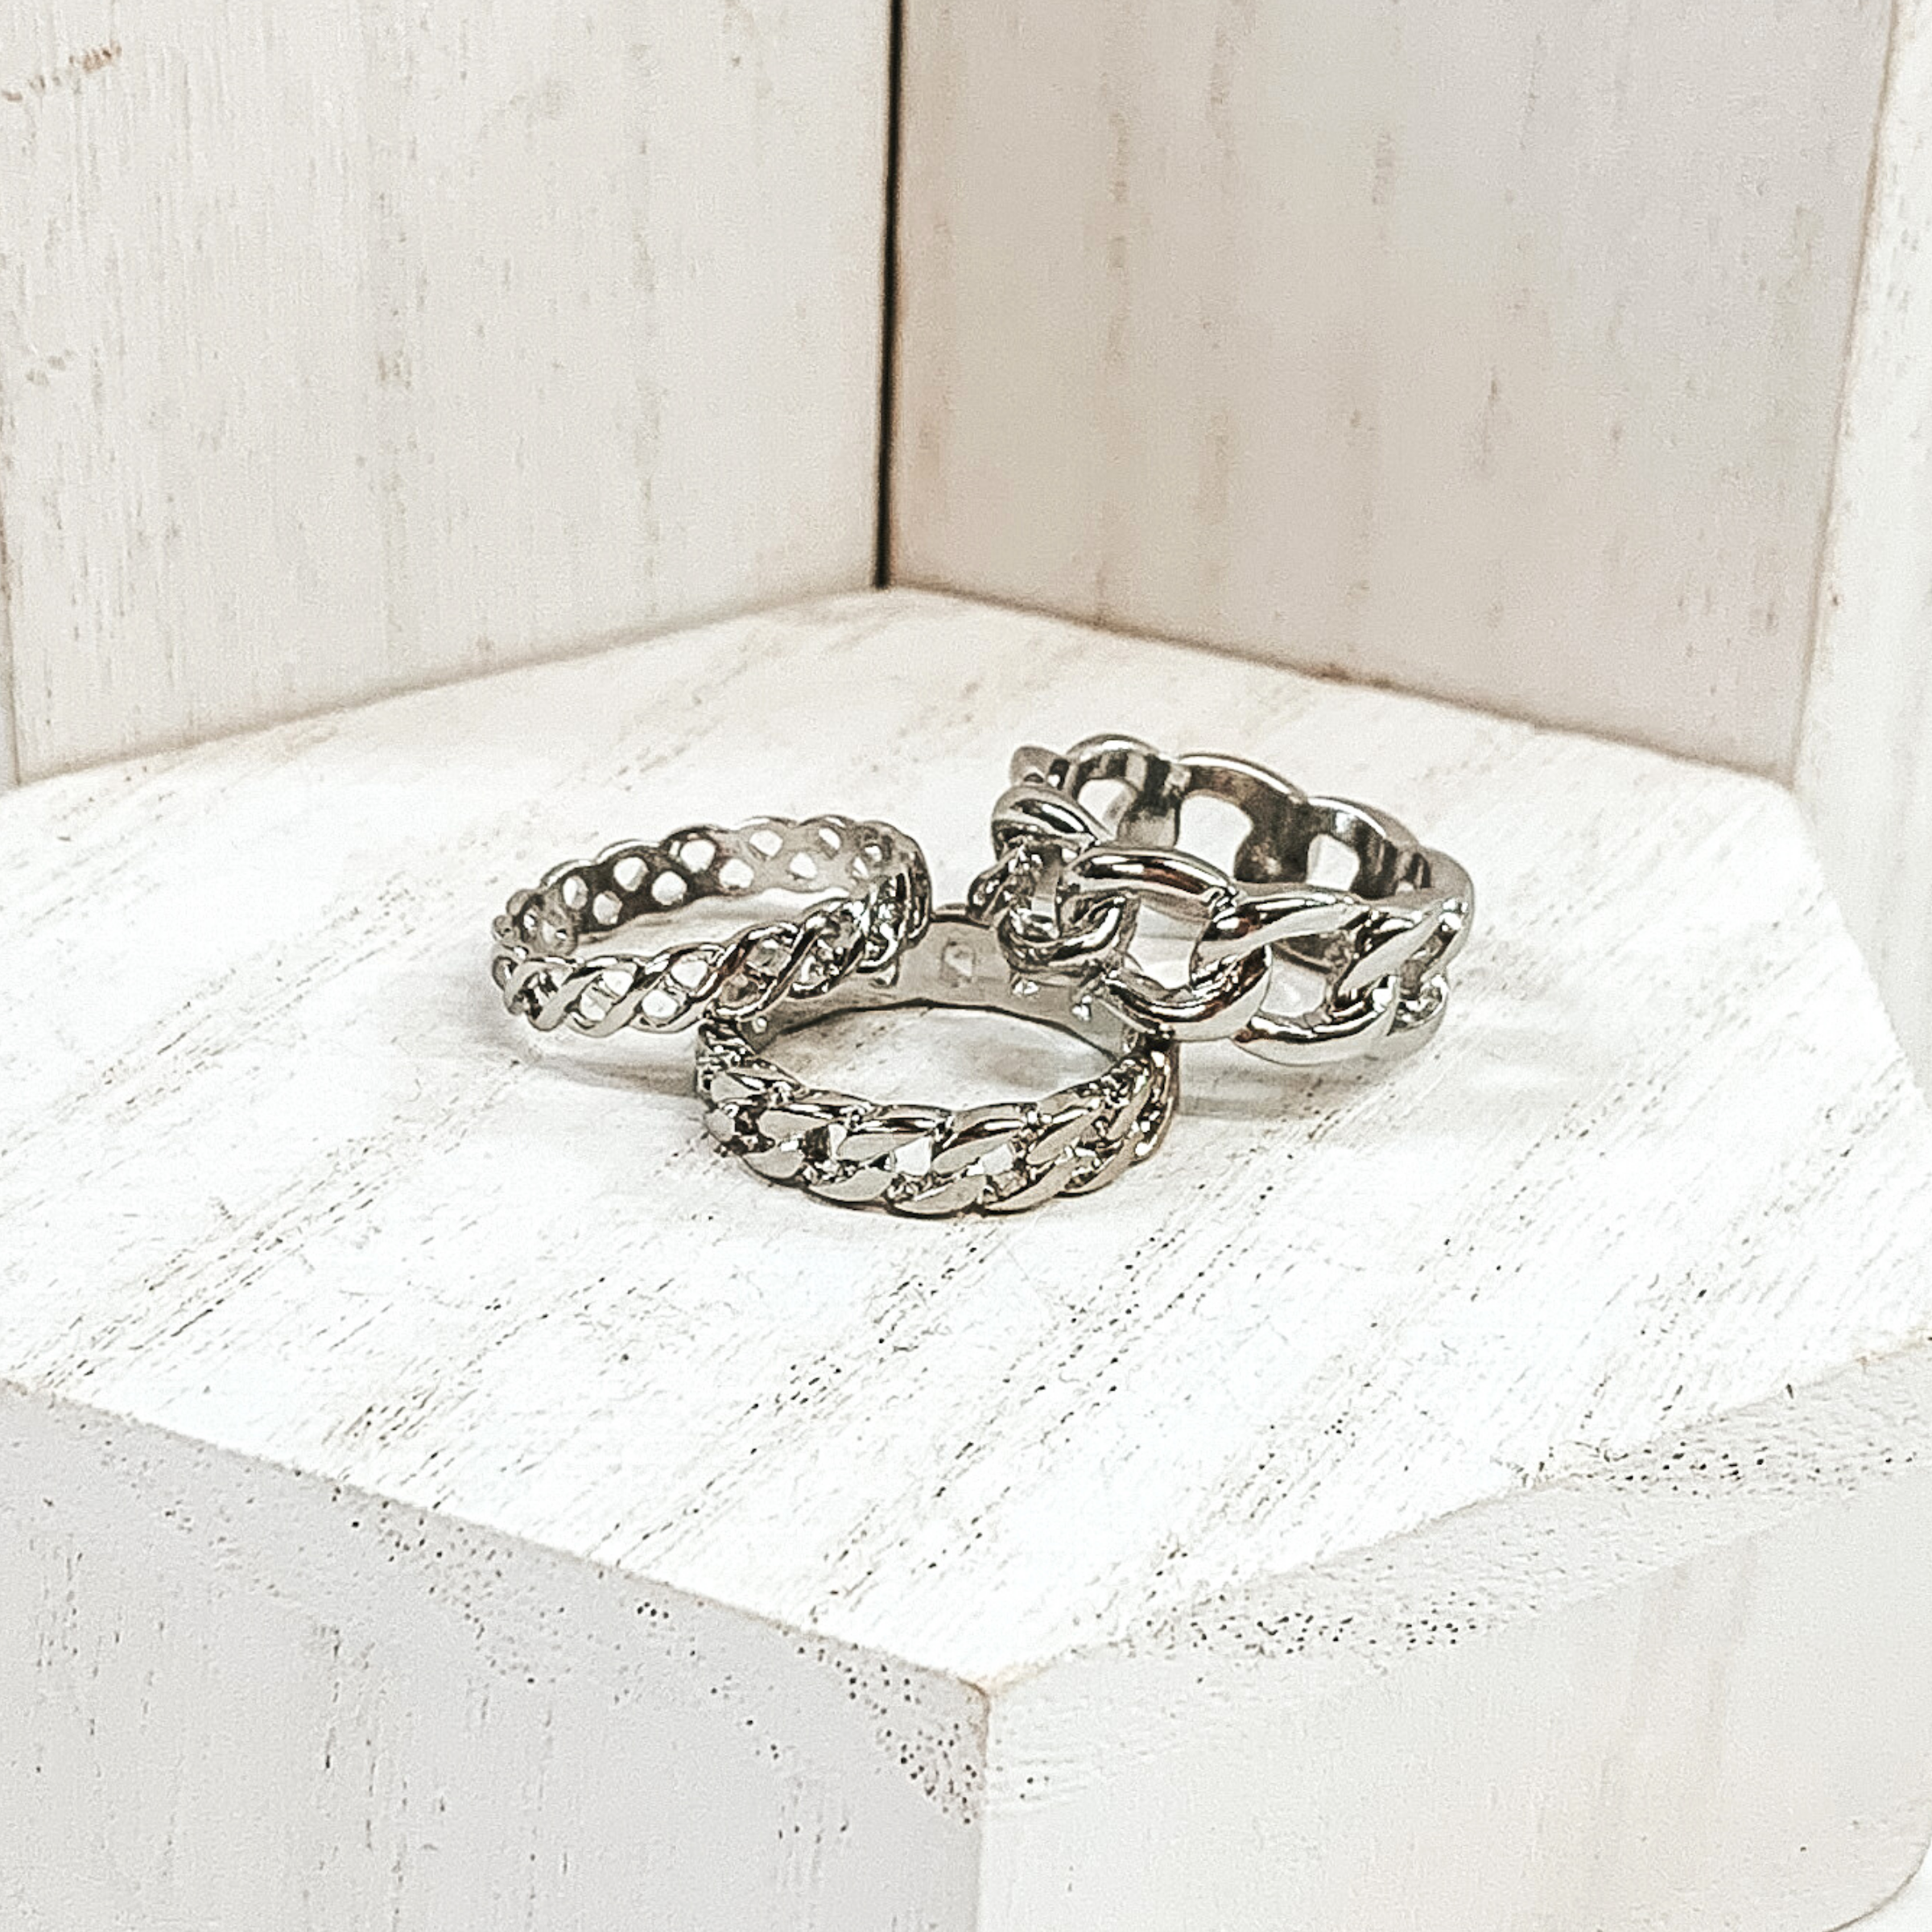 This set of silver rings include three different band widths and different types of chains for each ring. These rings are pictured on a white background.